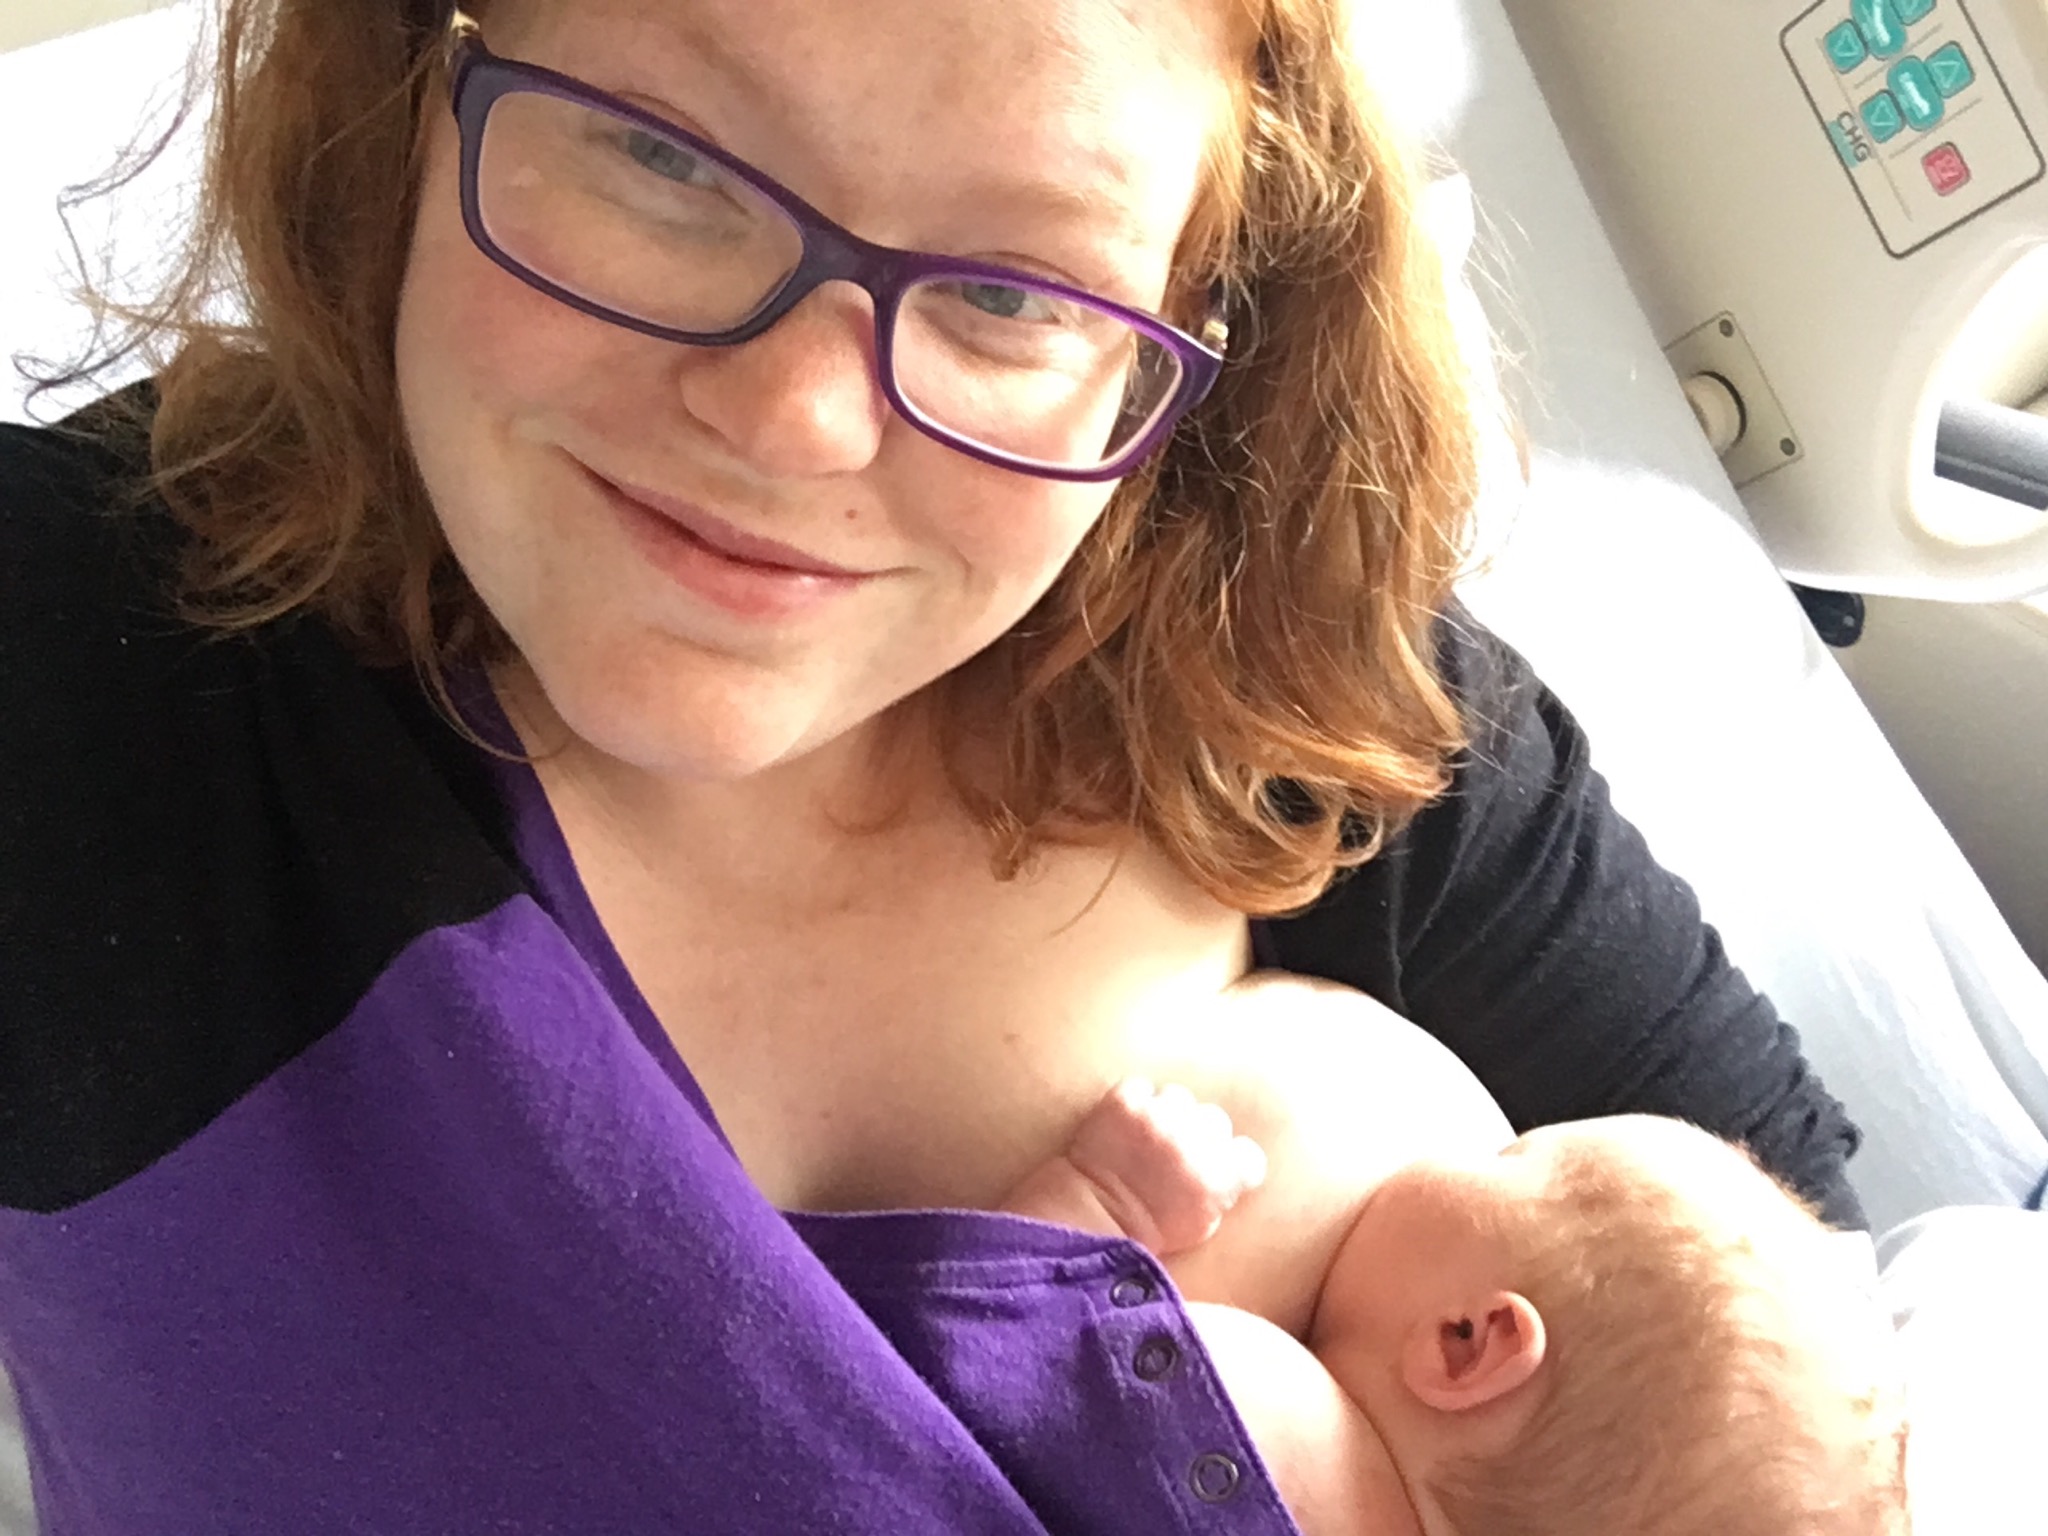 mother with red hair and wearing glasses smiles at camera as preemie infant breastfeeds